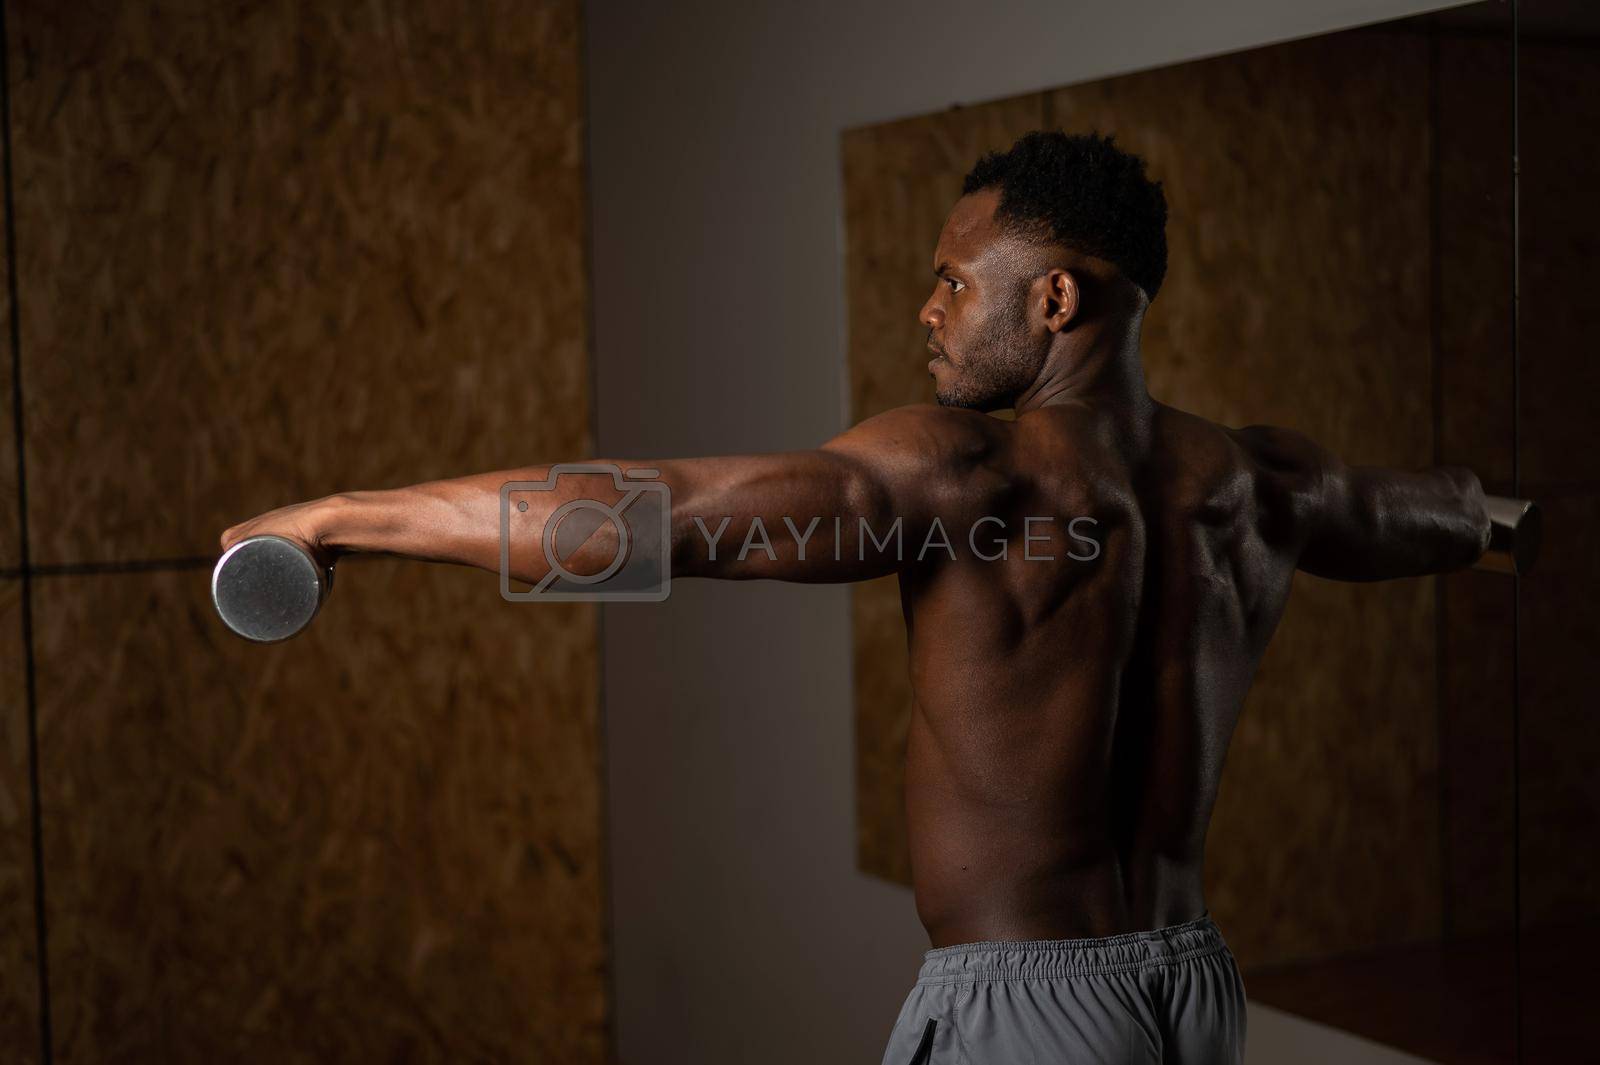 Royalty free image of Attractive african american man doing arm exercises with dumbbells. by mrwed54